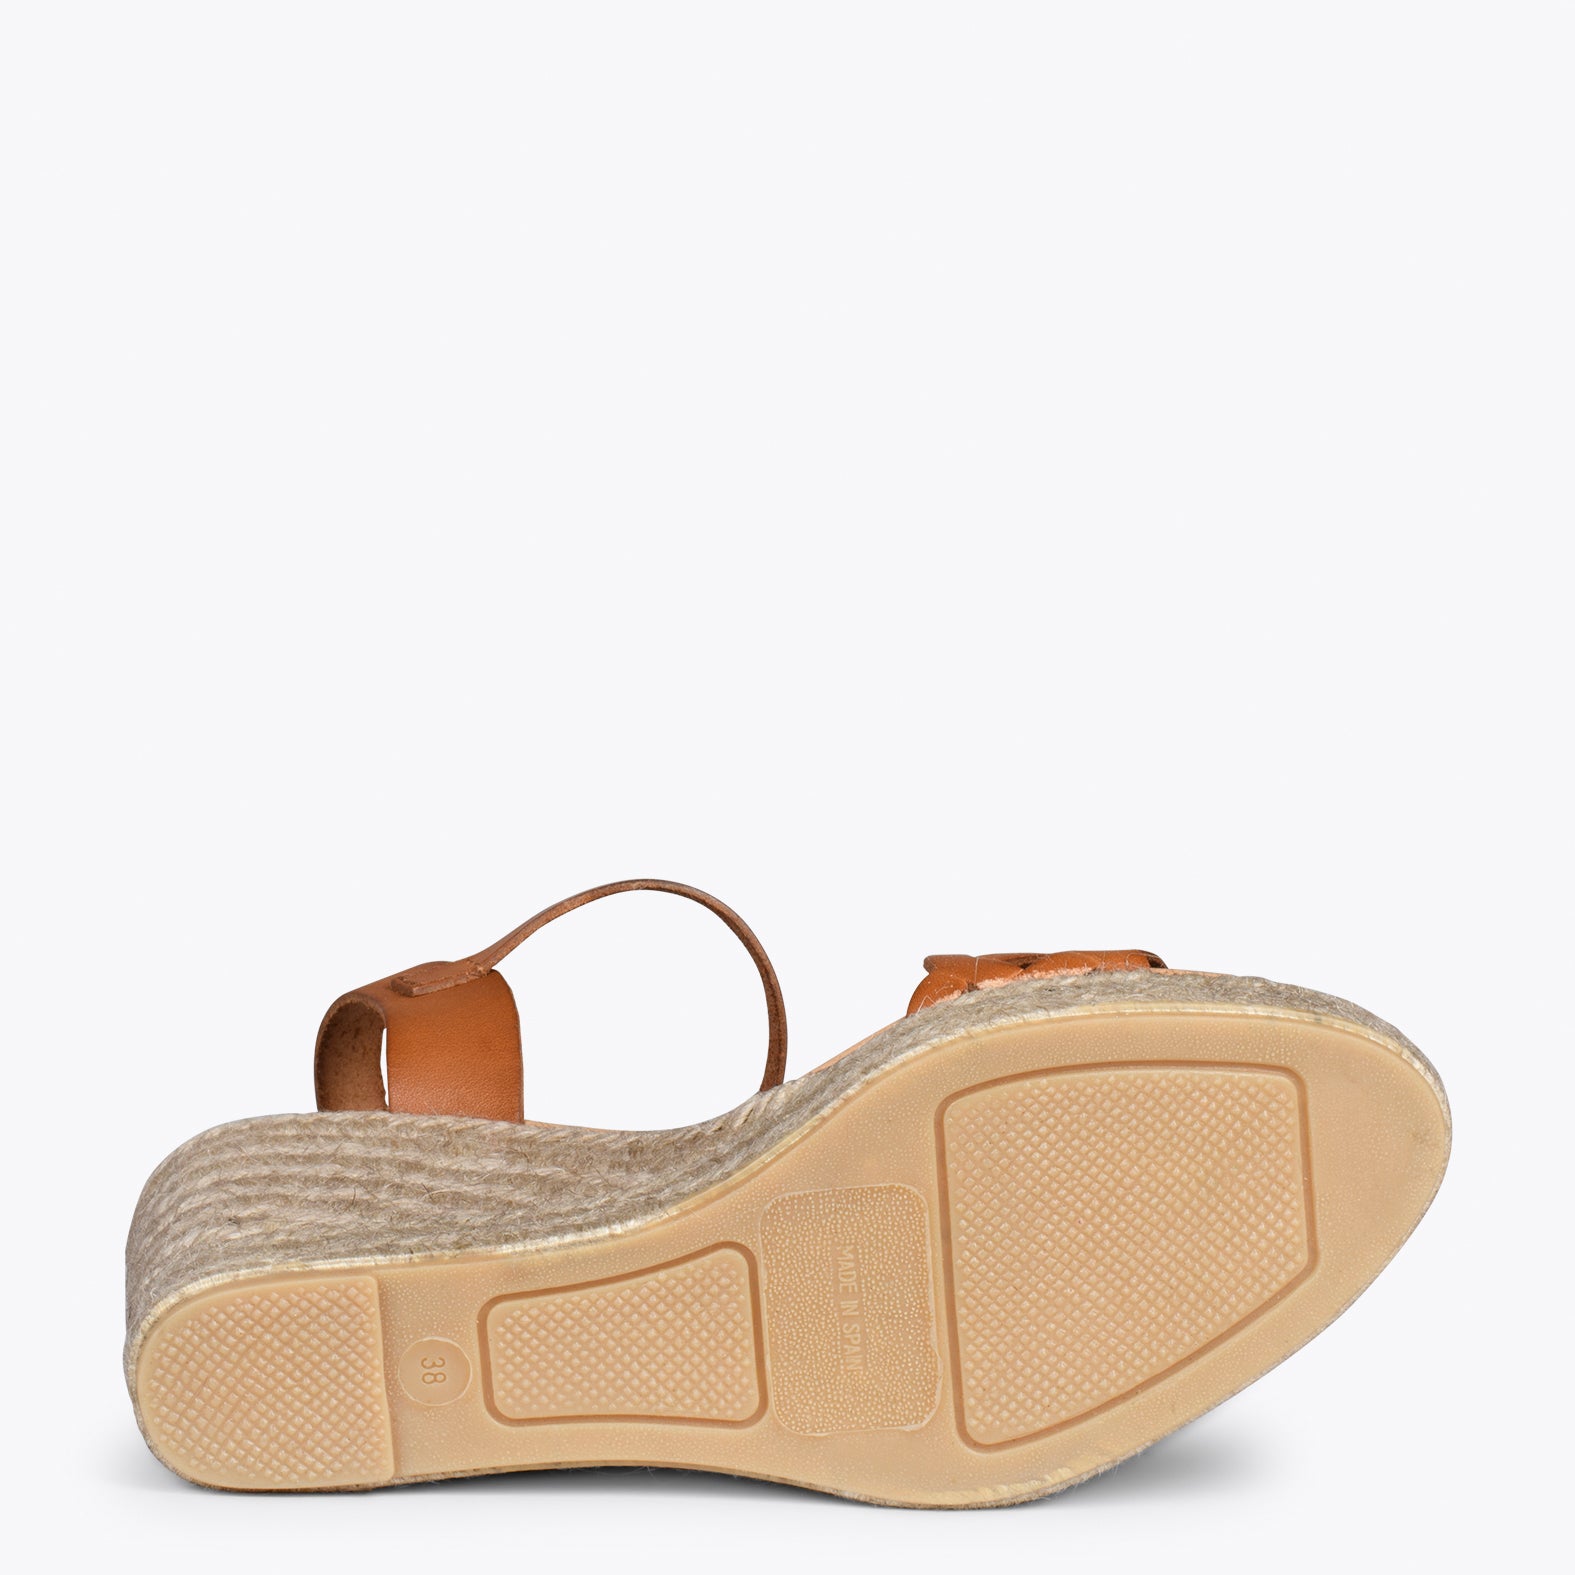 OASIS – CAMEL espadrille wedges with braided front